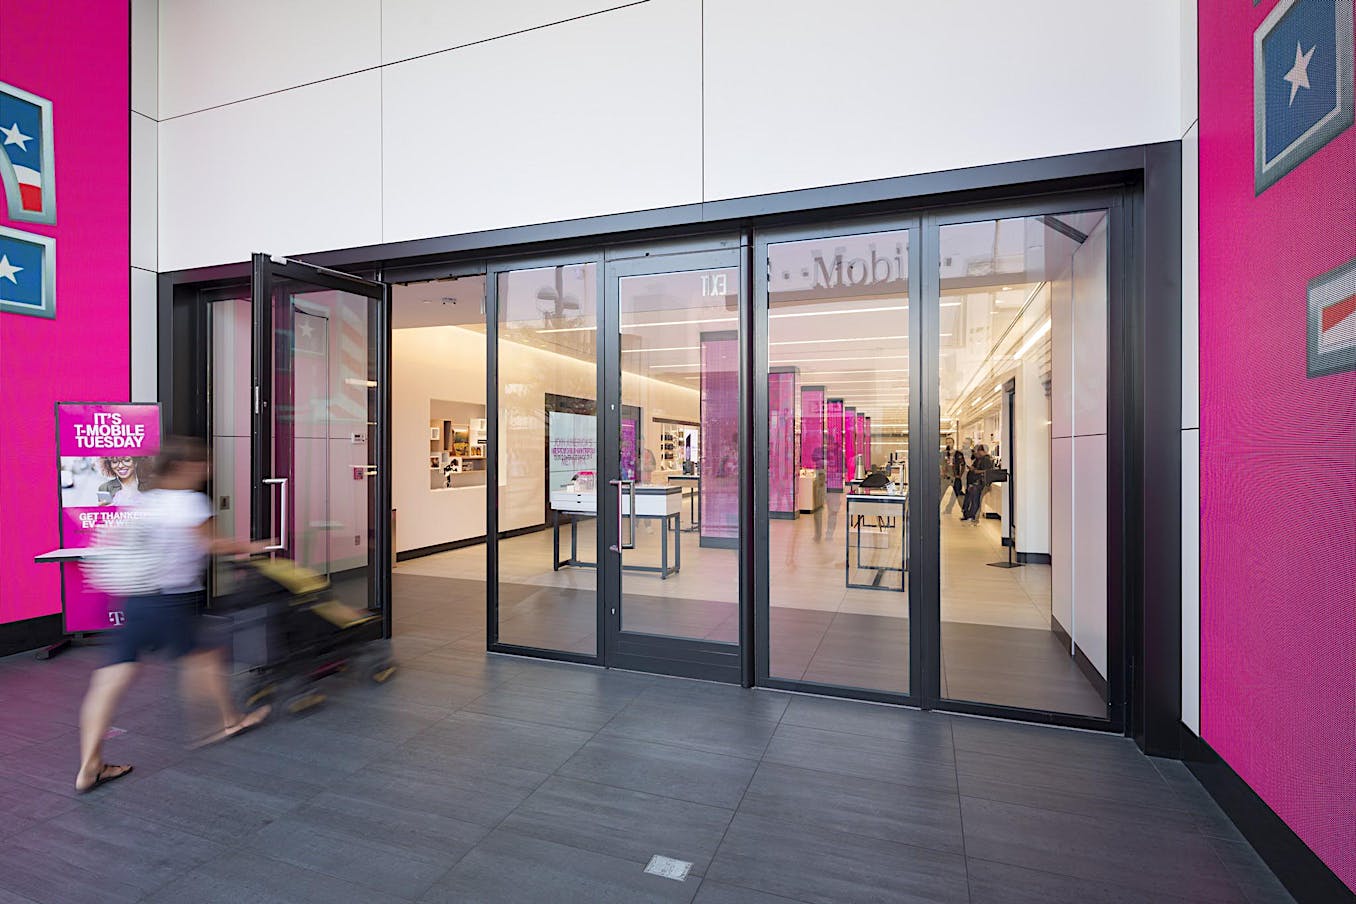 Retail storefront with a large sliding glass wall system